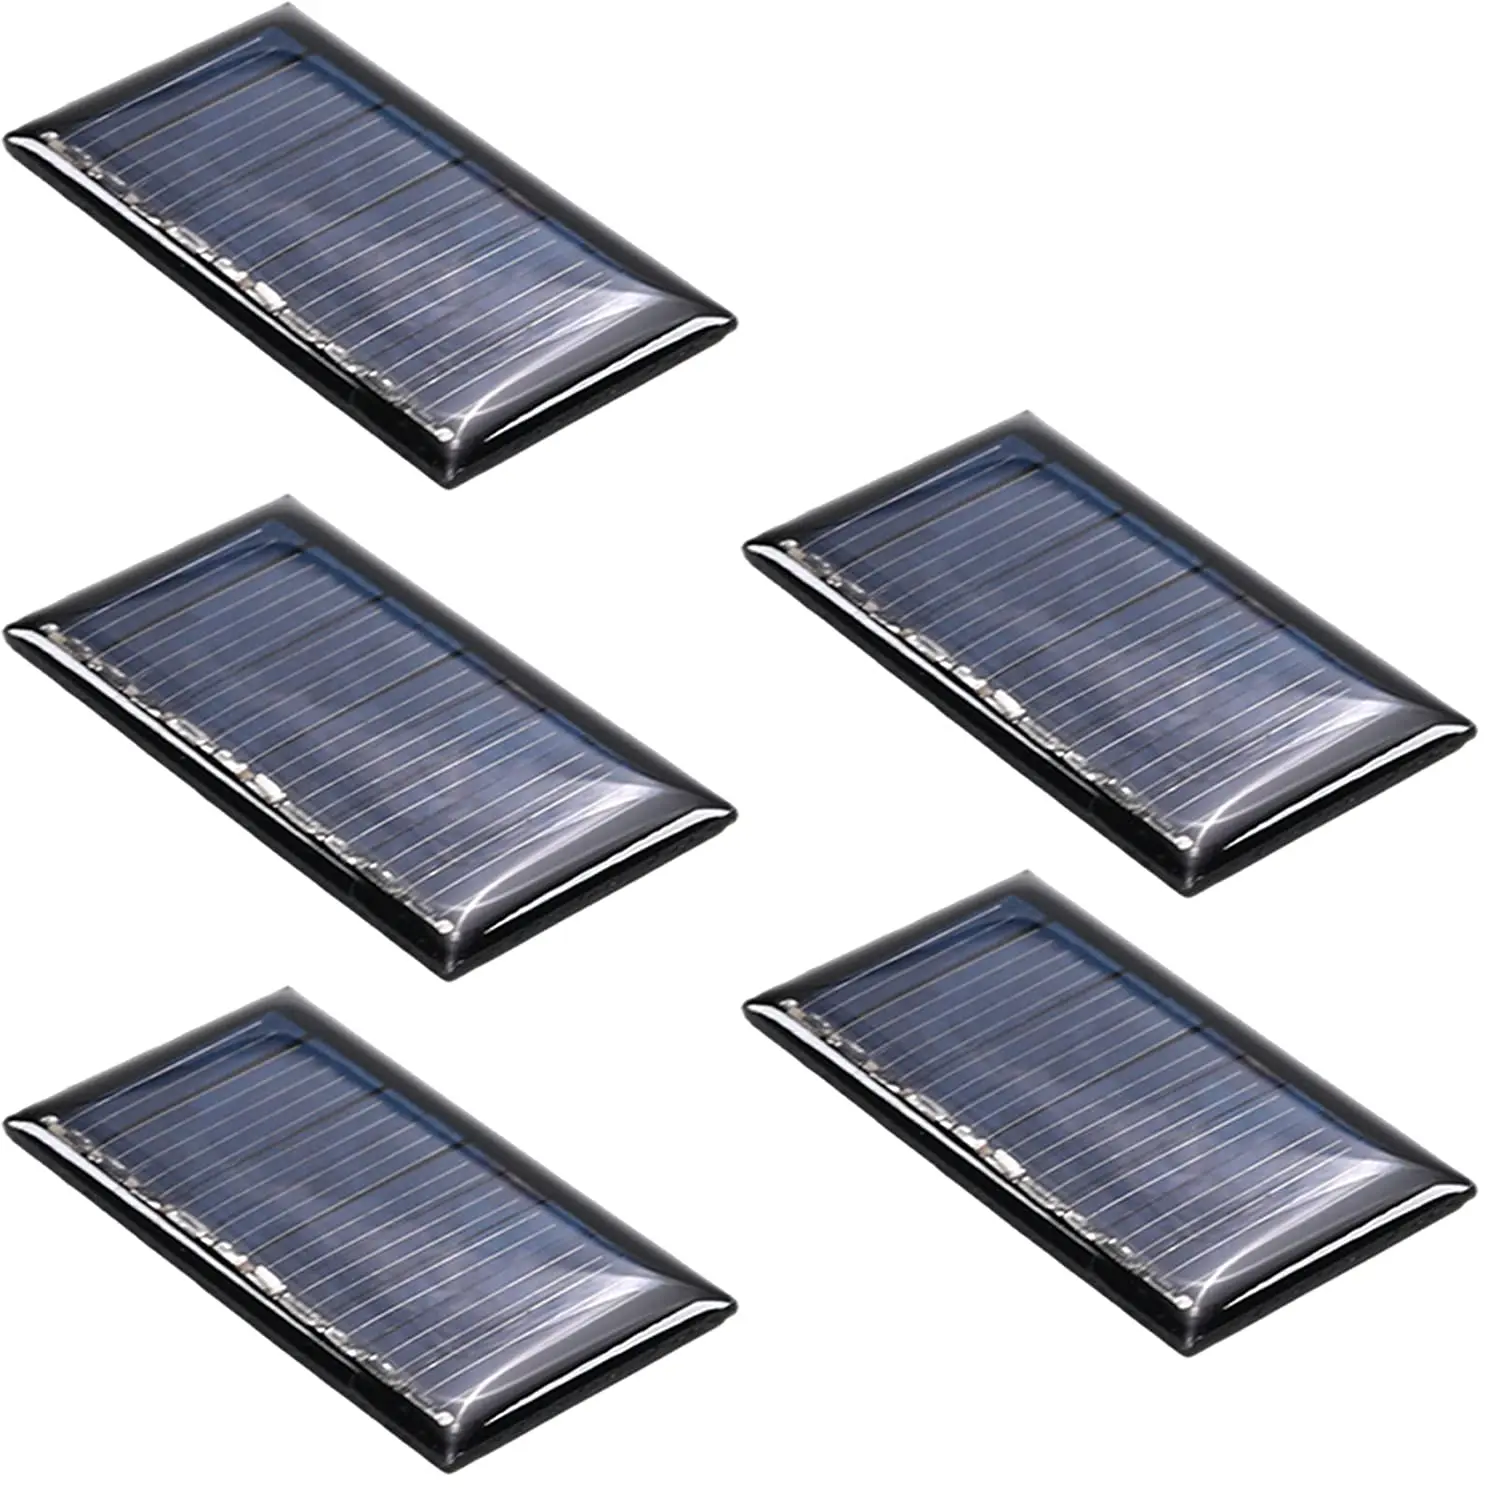 small solar panels - What's the smallest solar panel you can buy